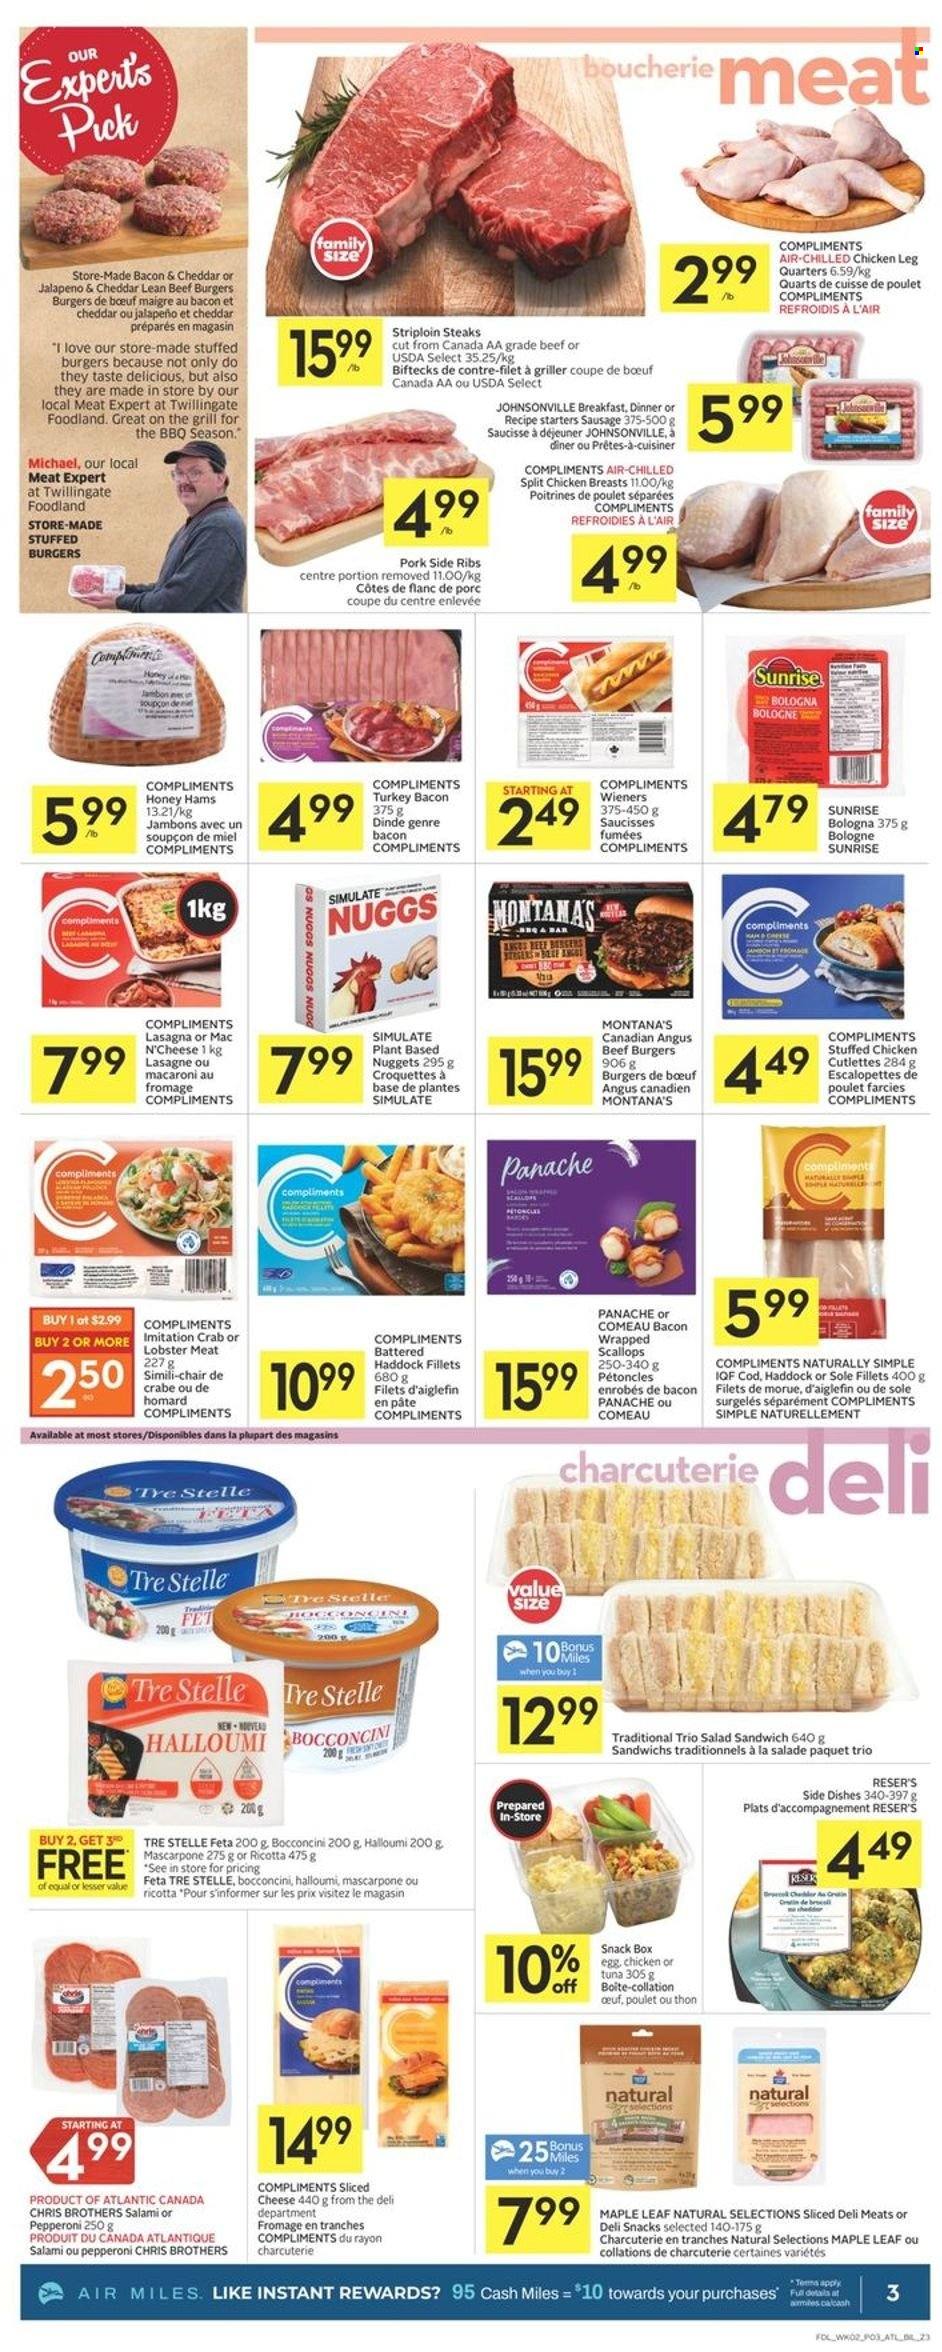 thumbnail - Co-op Flyer - May 12, 2022 - May 18, 2022 - Sales products - bacon wrapped scallops, cod, lobster, scallops, tuna, haddock, crab, macaroni, nuggets, hamburger, beef burger, lasagna meal, stuffed chicken, bacon, salami, turkey bacon, bologna sausage, Johnsonville, sausage, pepperoni, bocconcini, sliced cheese, halloumi, cheese, feta, eggs, potato croquettes, snack, honey, BROTHERS, chicken breasts, chicken legs, beef meat, striploin steak, mascarpone, ricotta, steak. Page 3.